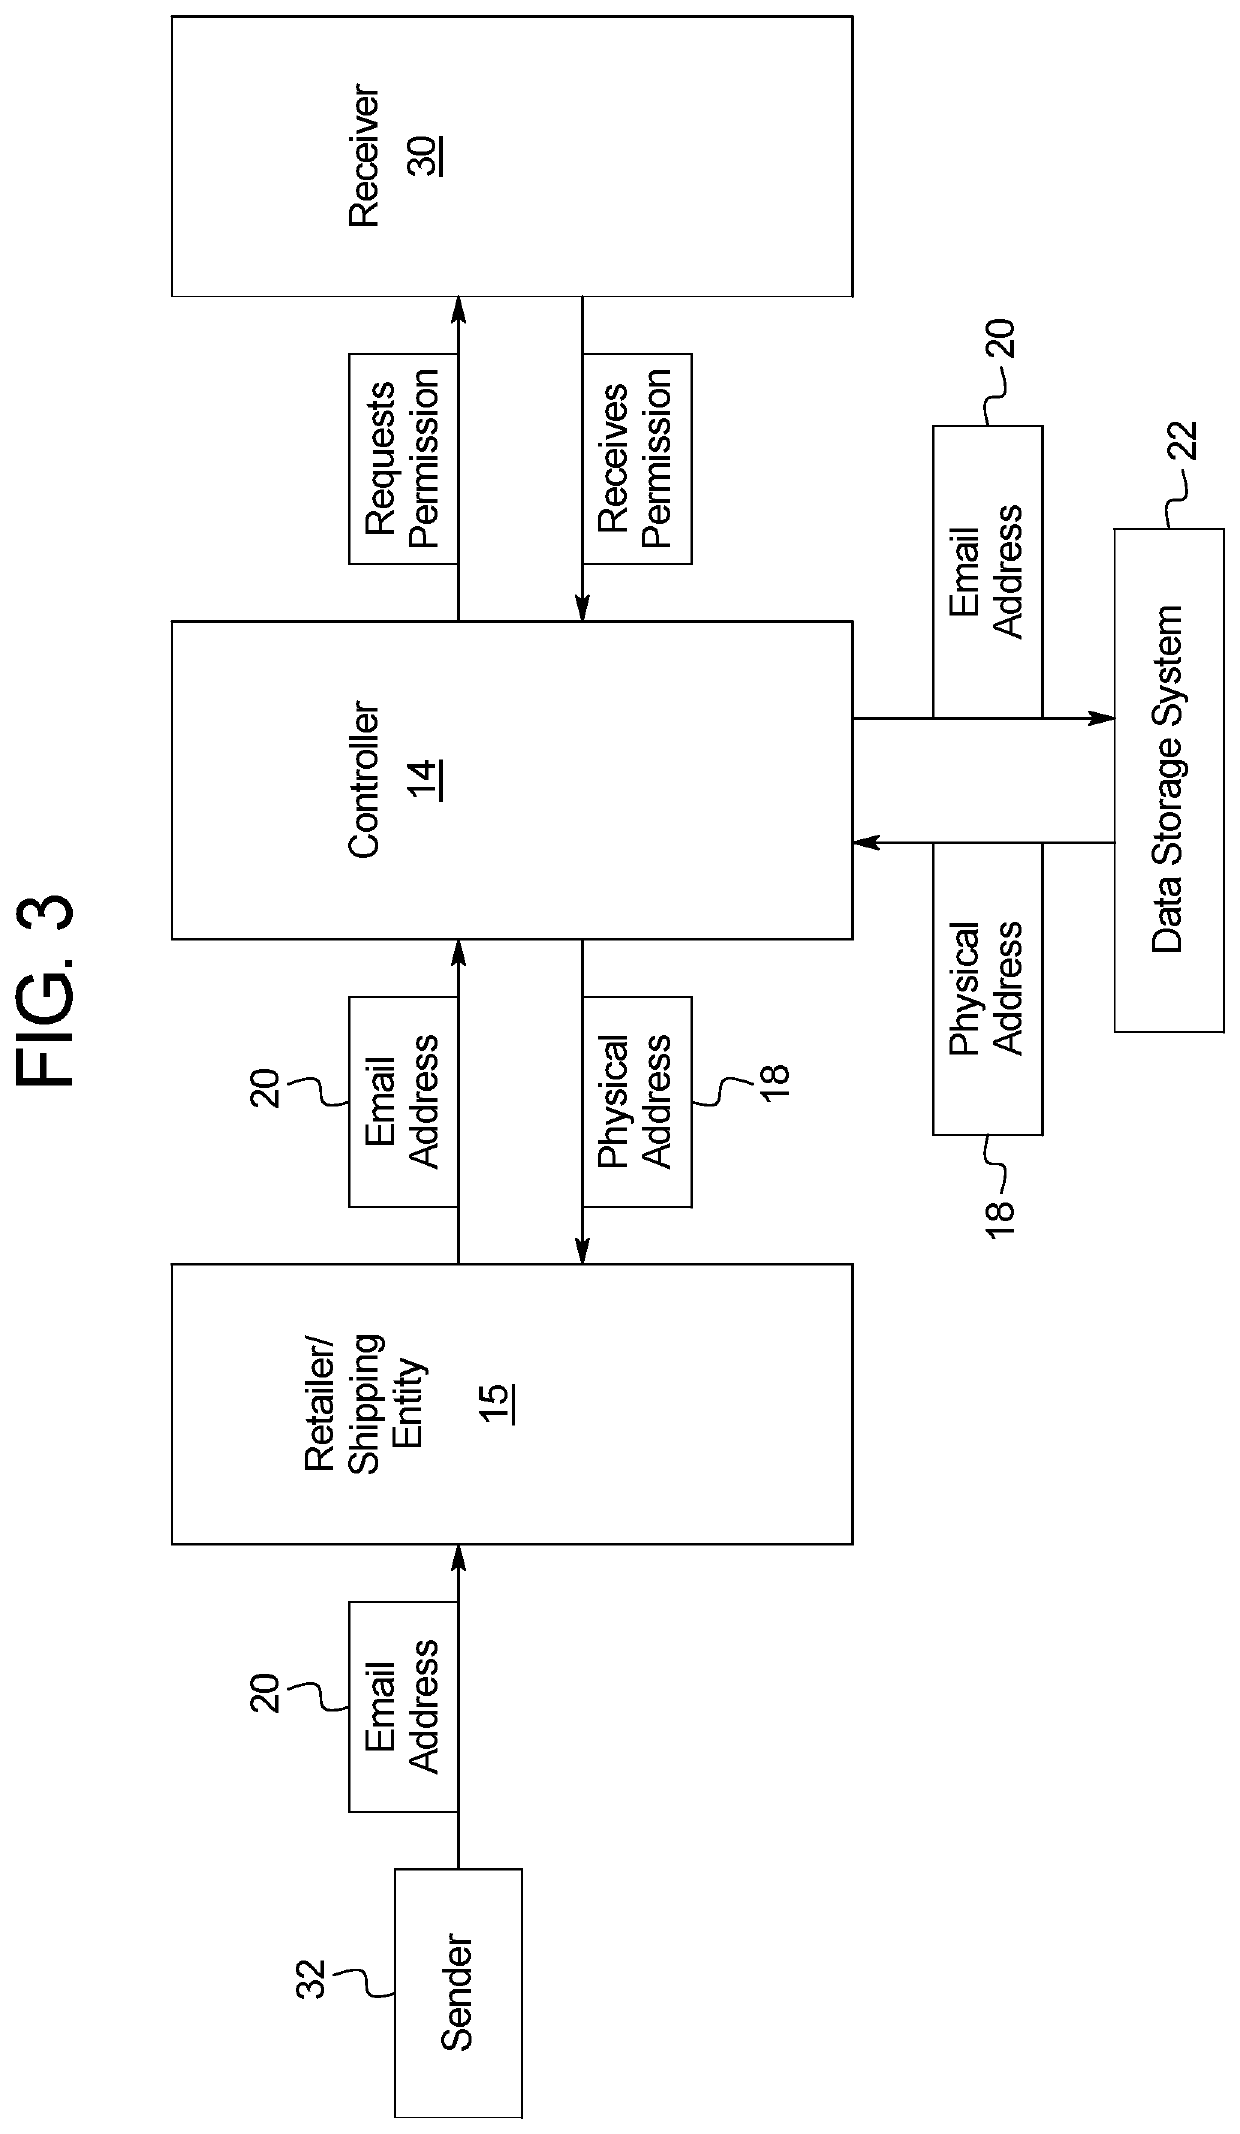 Address exchange systems and methods